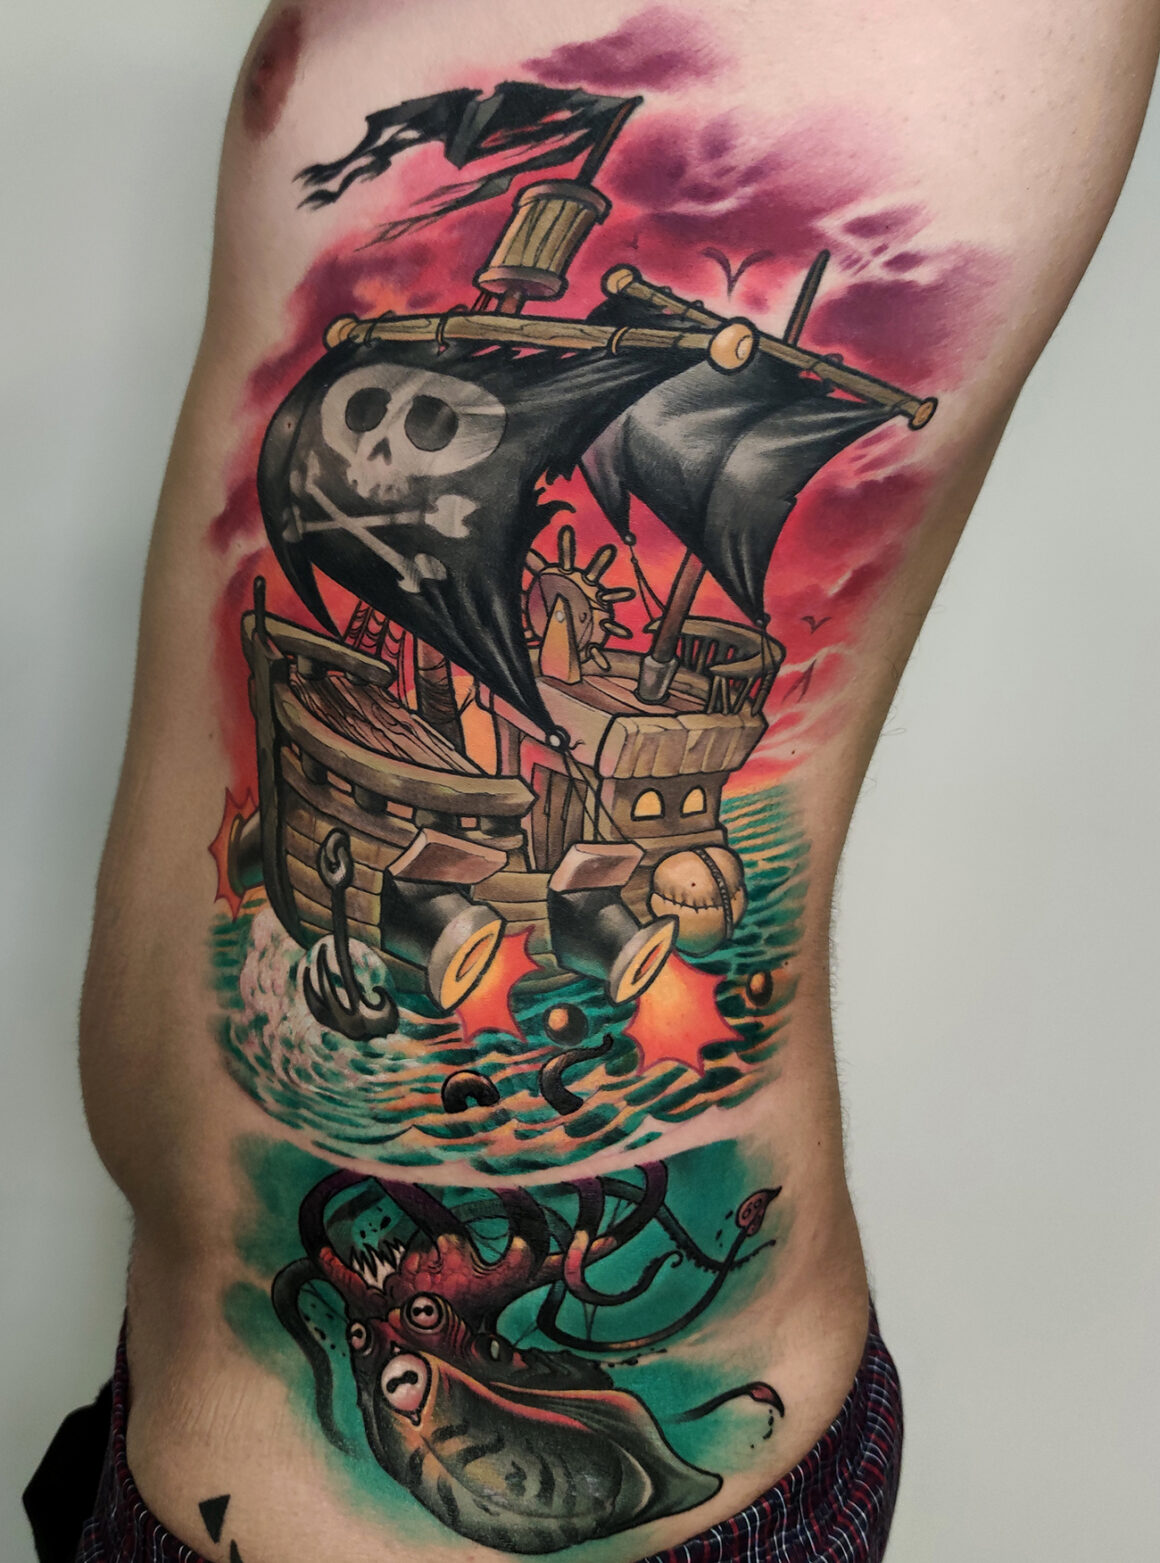 Tattoo by Rasel, Dirty Roses Tattoo